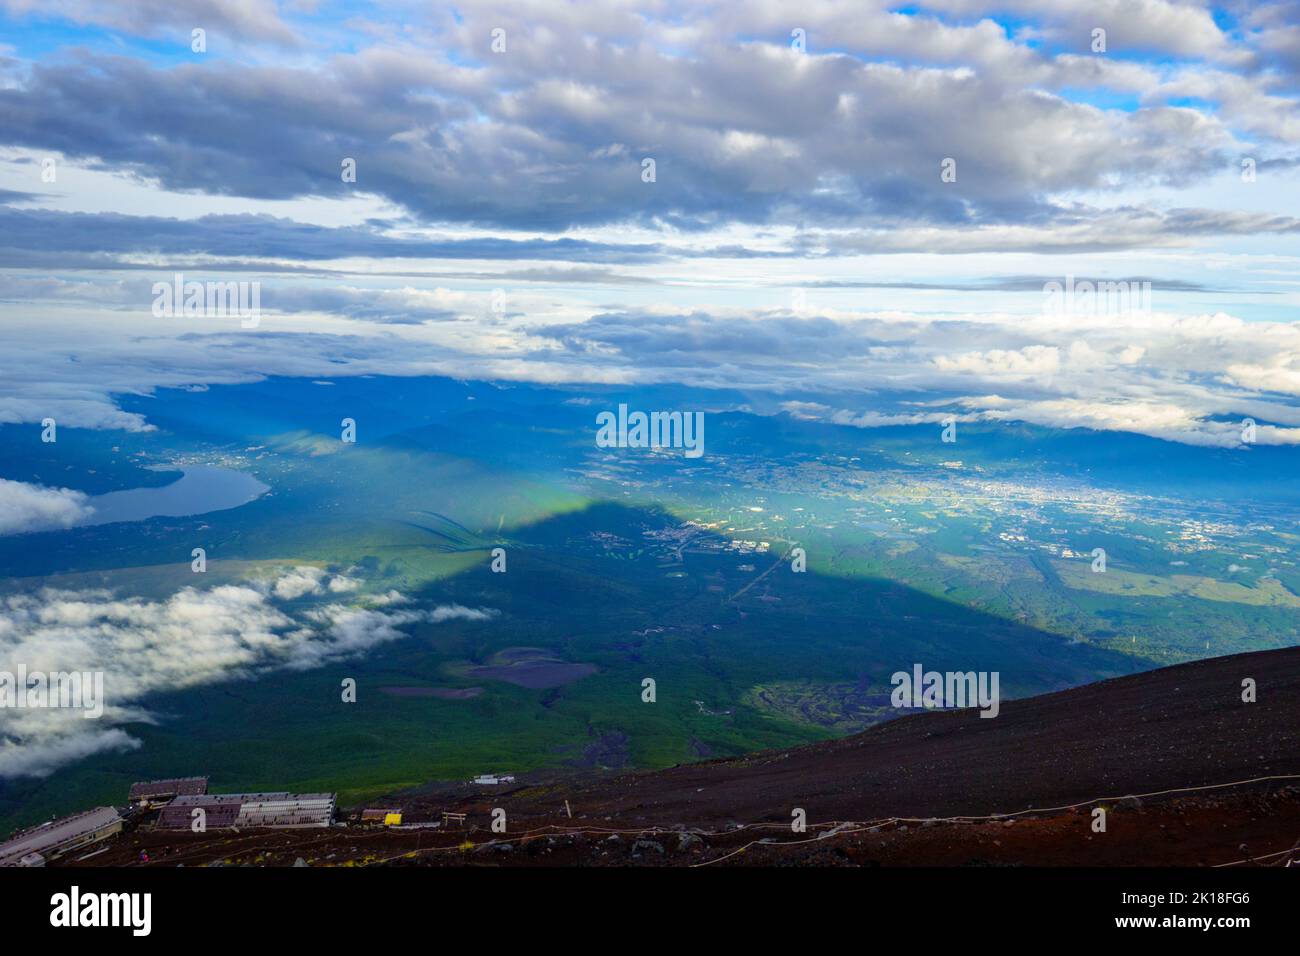 Mountain huts on slope of Mt. Fuji with large shadow dominating landscape in background Stock Photo